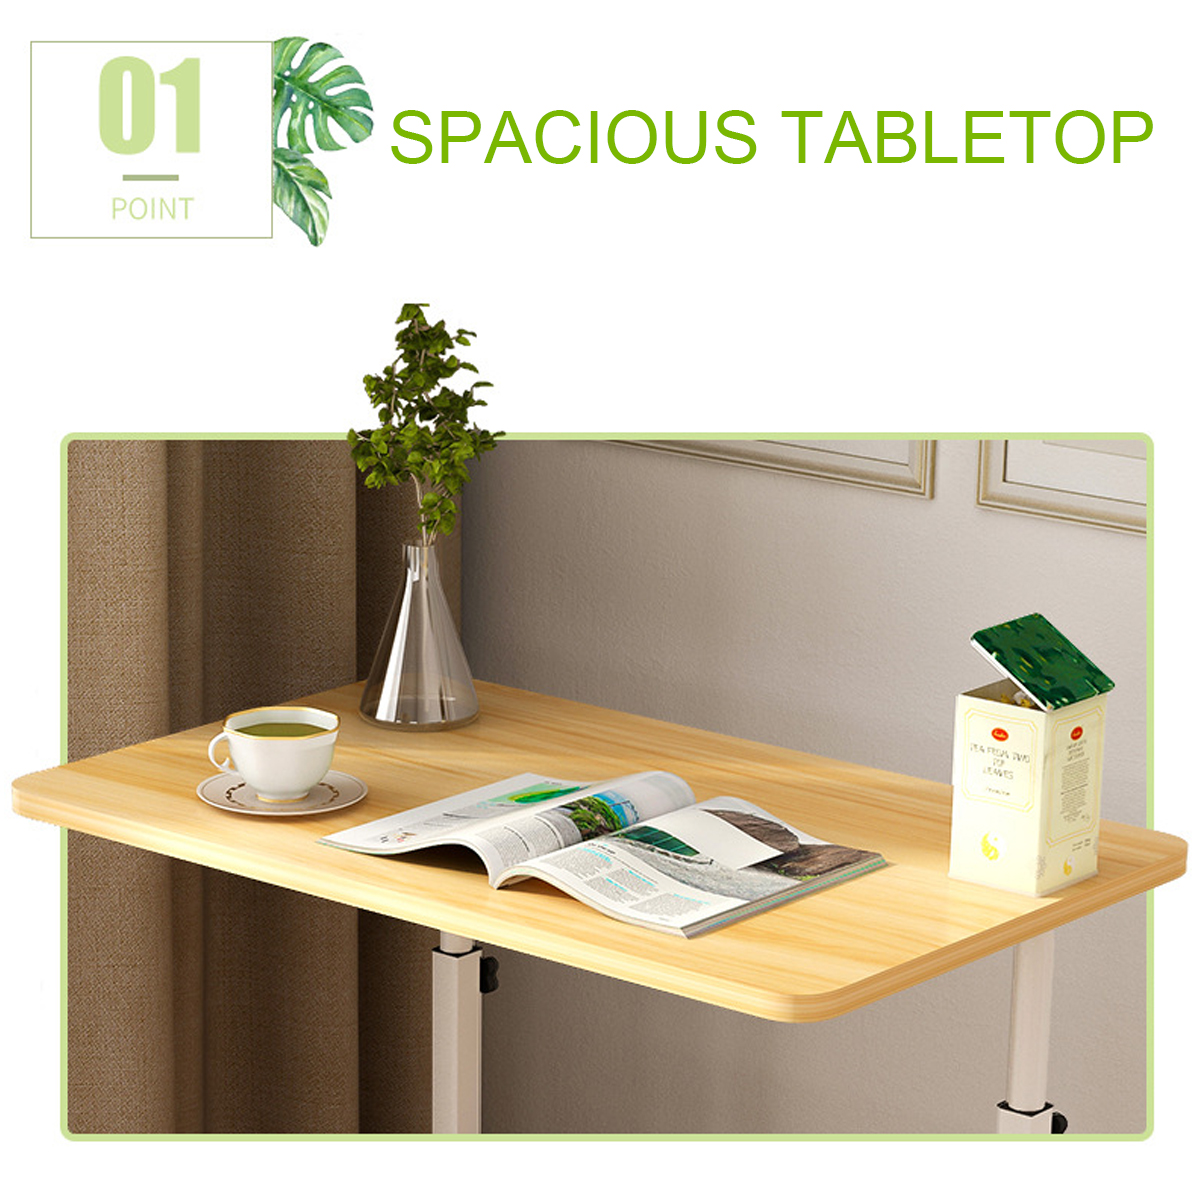 Removable-Laptop-Table-Lifting-Desk-Tabletop-Food-Tray-Bedside-Table-Bed-Sofa-Stand-with-Wheel-1754628-2